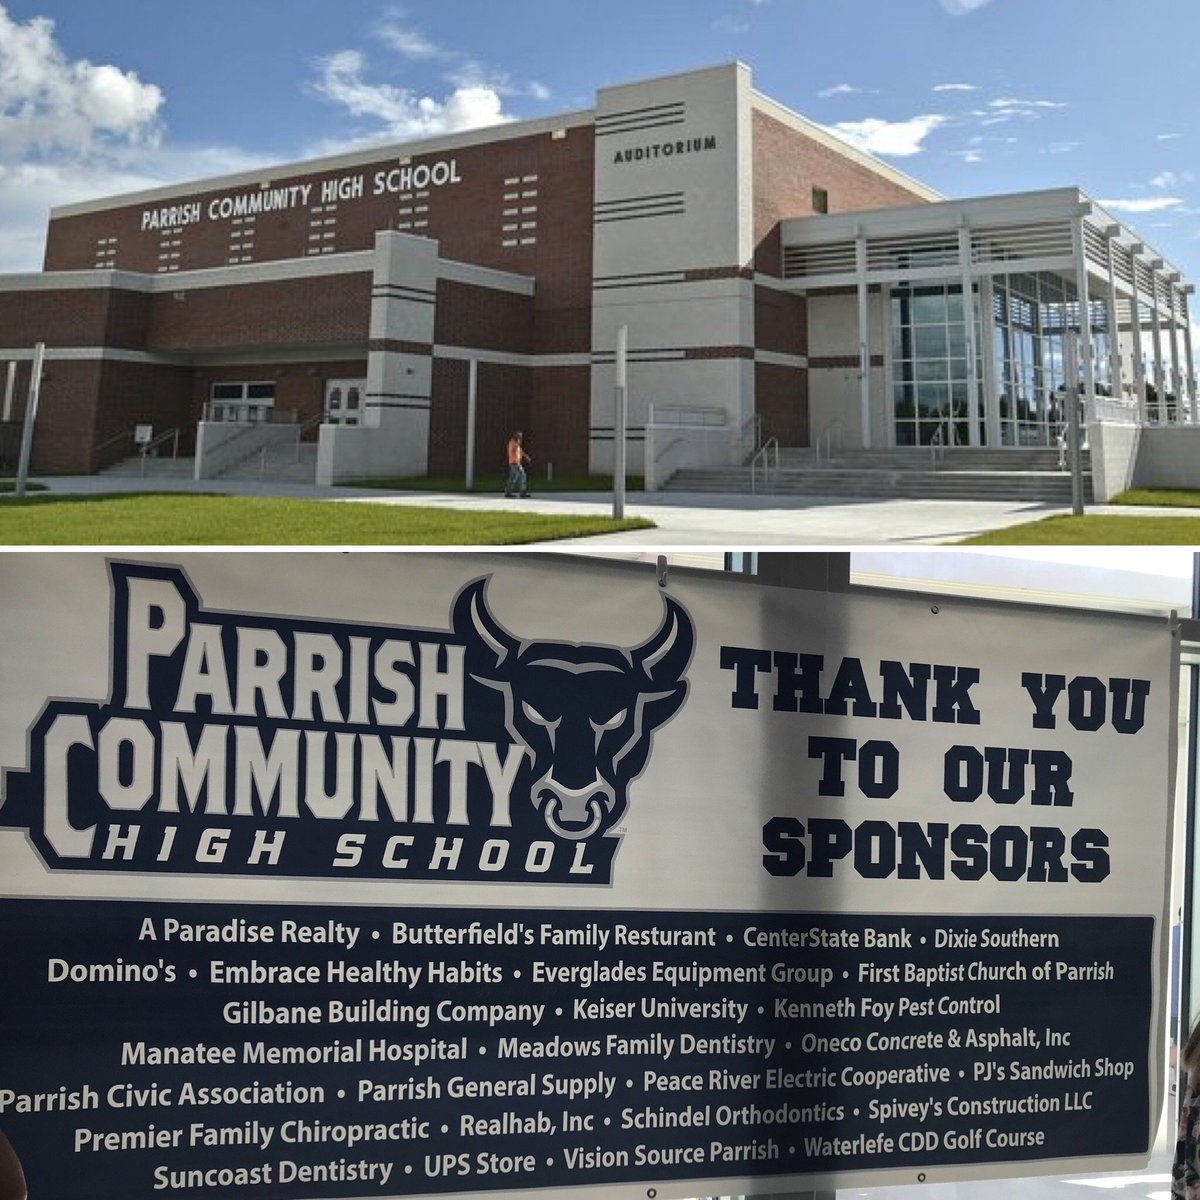 Keiser University is a proud sponsor of Parrish Community High School in Manatee County, and we wish you the best of luck as you welcome students for the first time! 📚

#keiseruniversity #keisercares #keisercommunity
#parrishcommunityhighschool #manateecountypublicschools